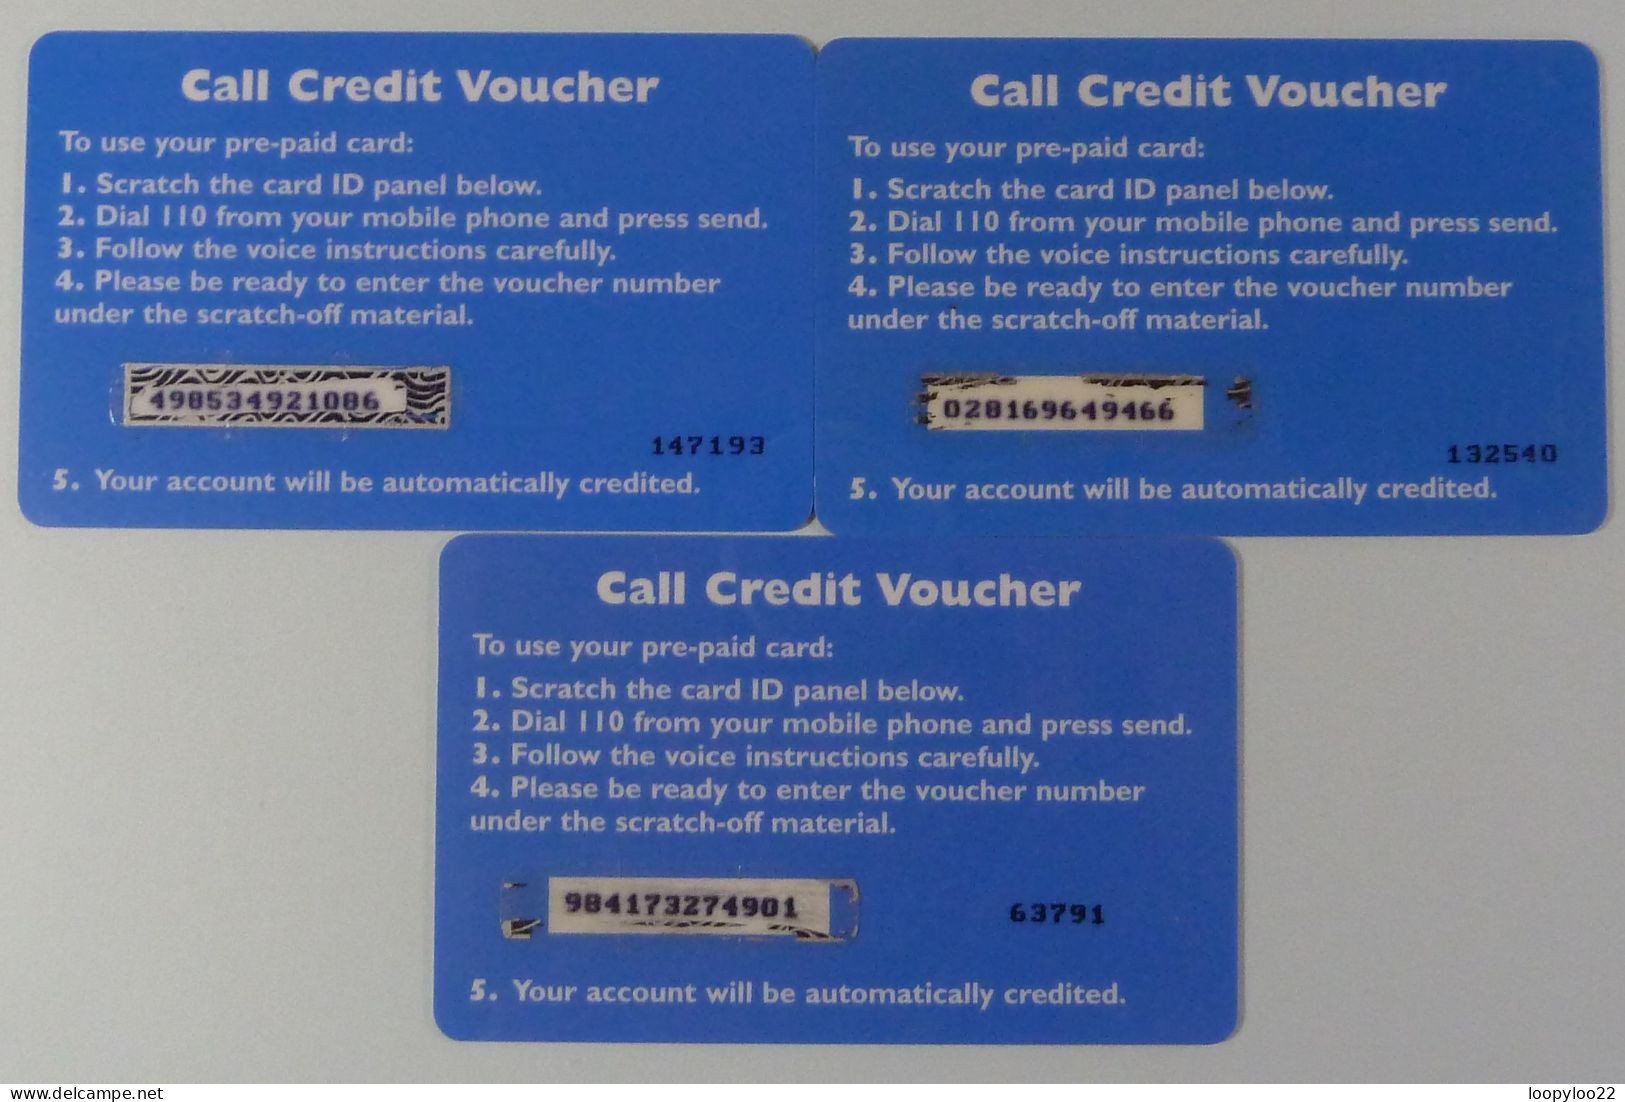 SEYCHELLES - Cable & Wireless - Mobile - Prepaid - Call Credit Voucher - Group Of 3 - Sychelles